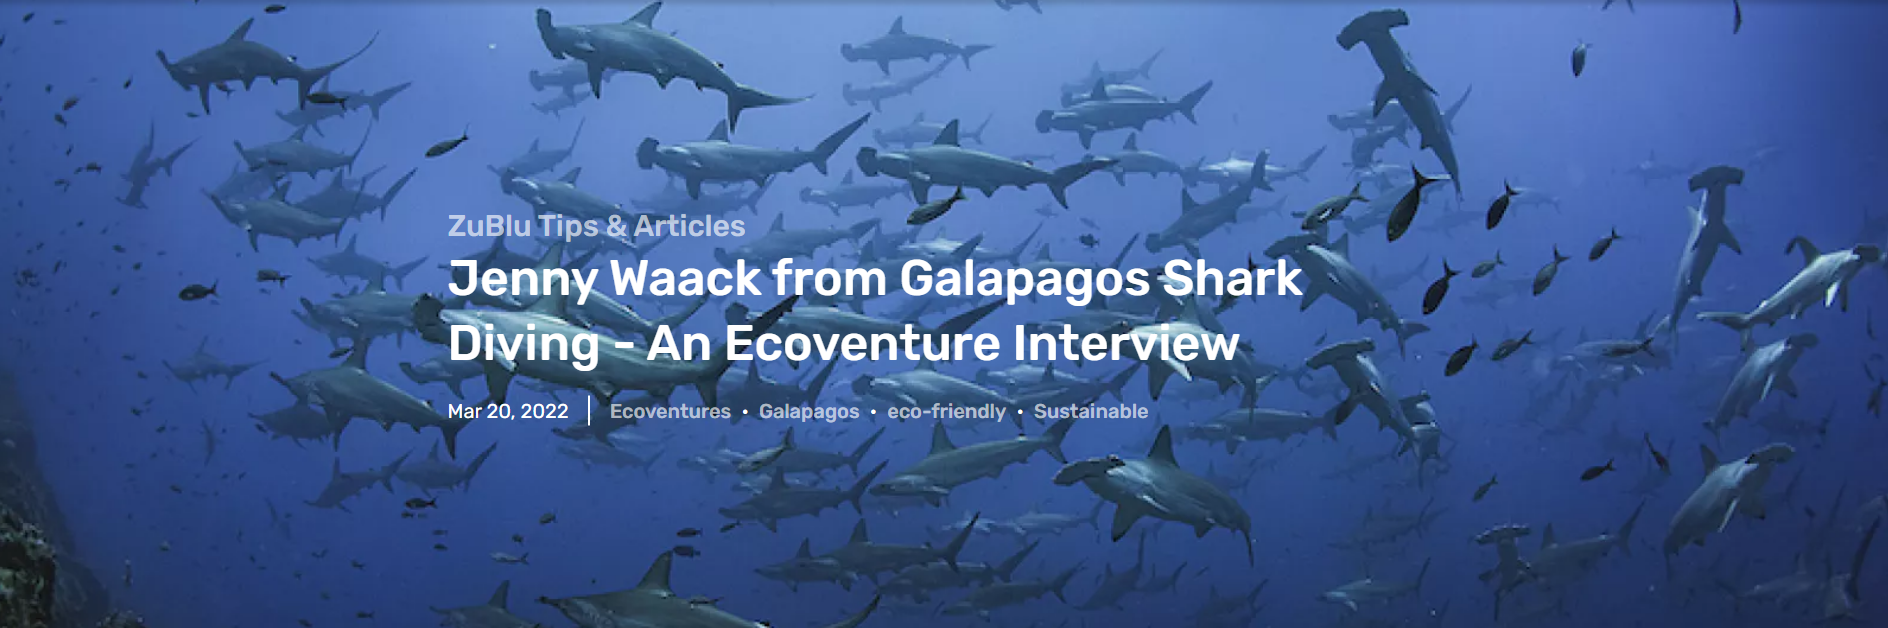 Jenny Waack from Galapagos Shark Diving - An Ecoventure Interview